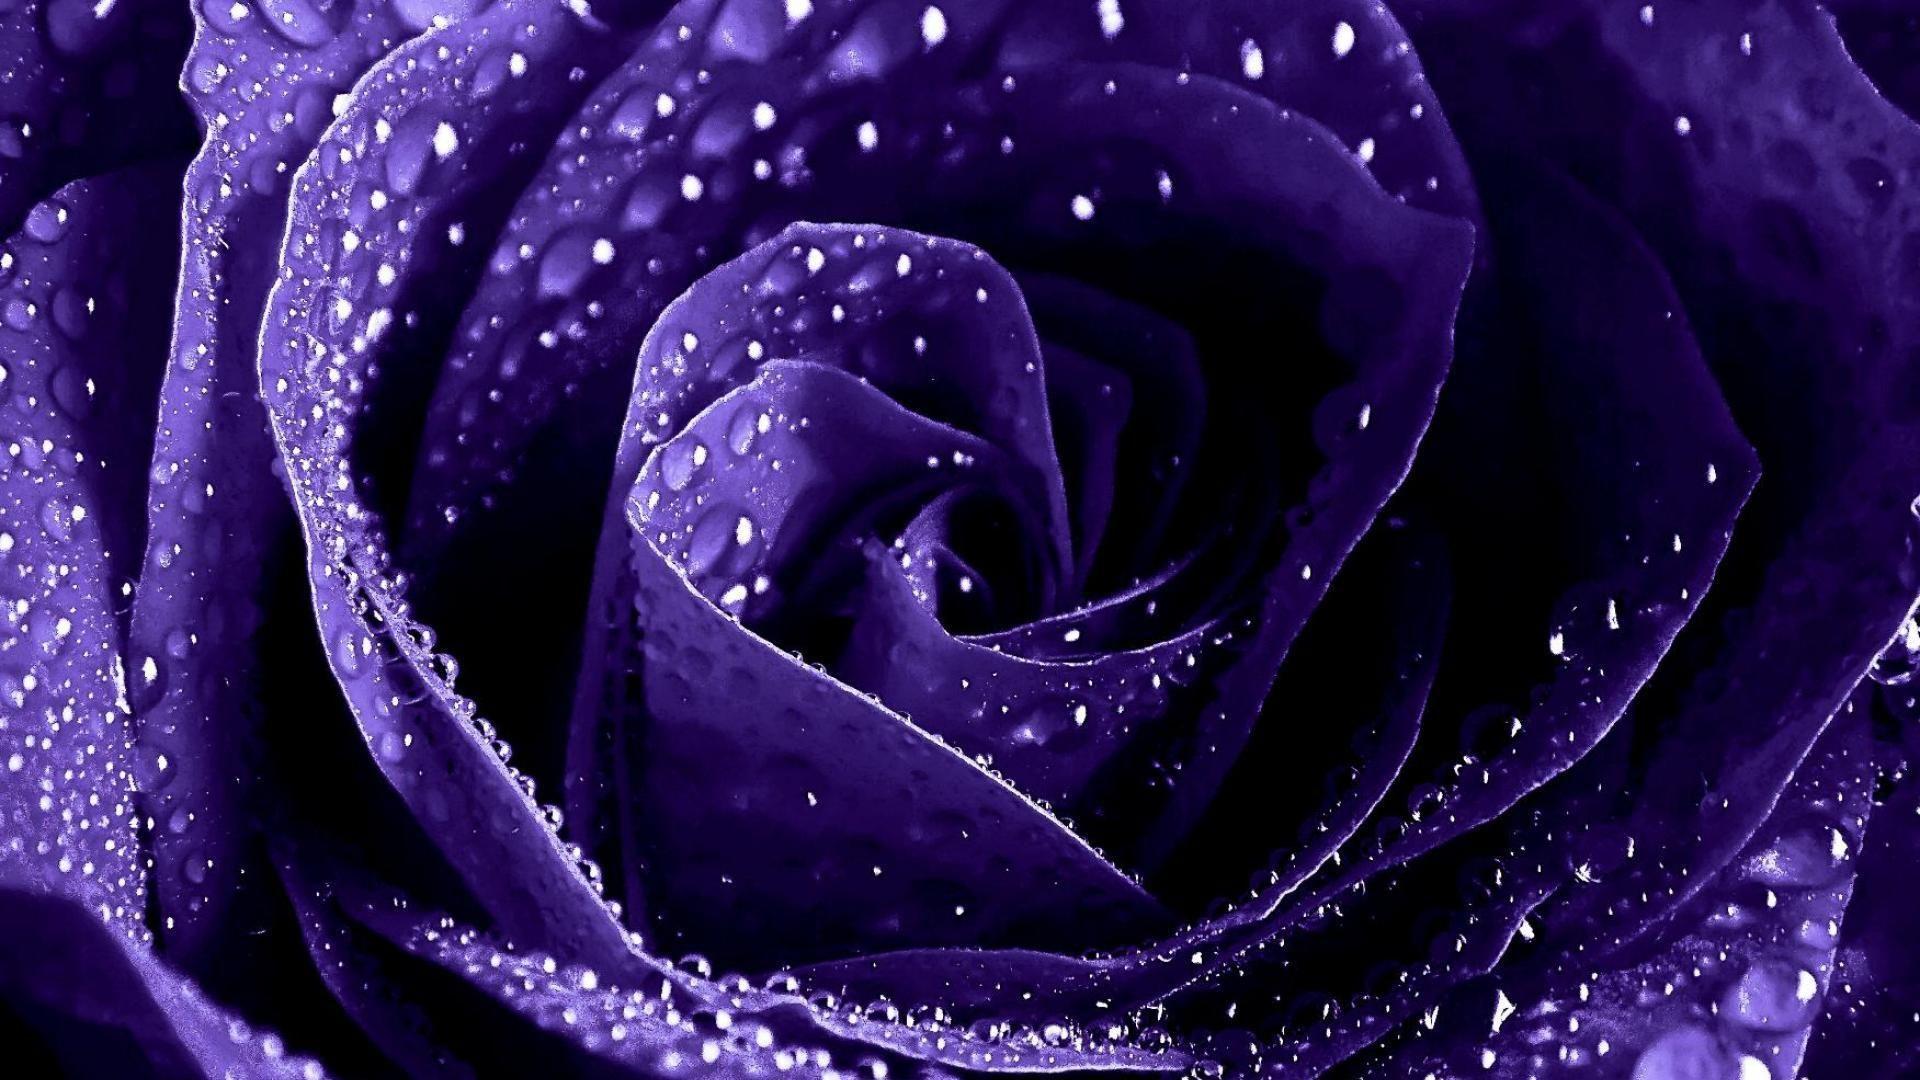 Black and Purple Flower Wallpapers - Top Free Black and Purple Flower